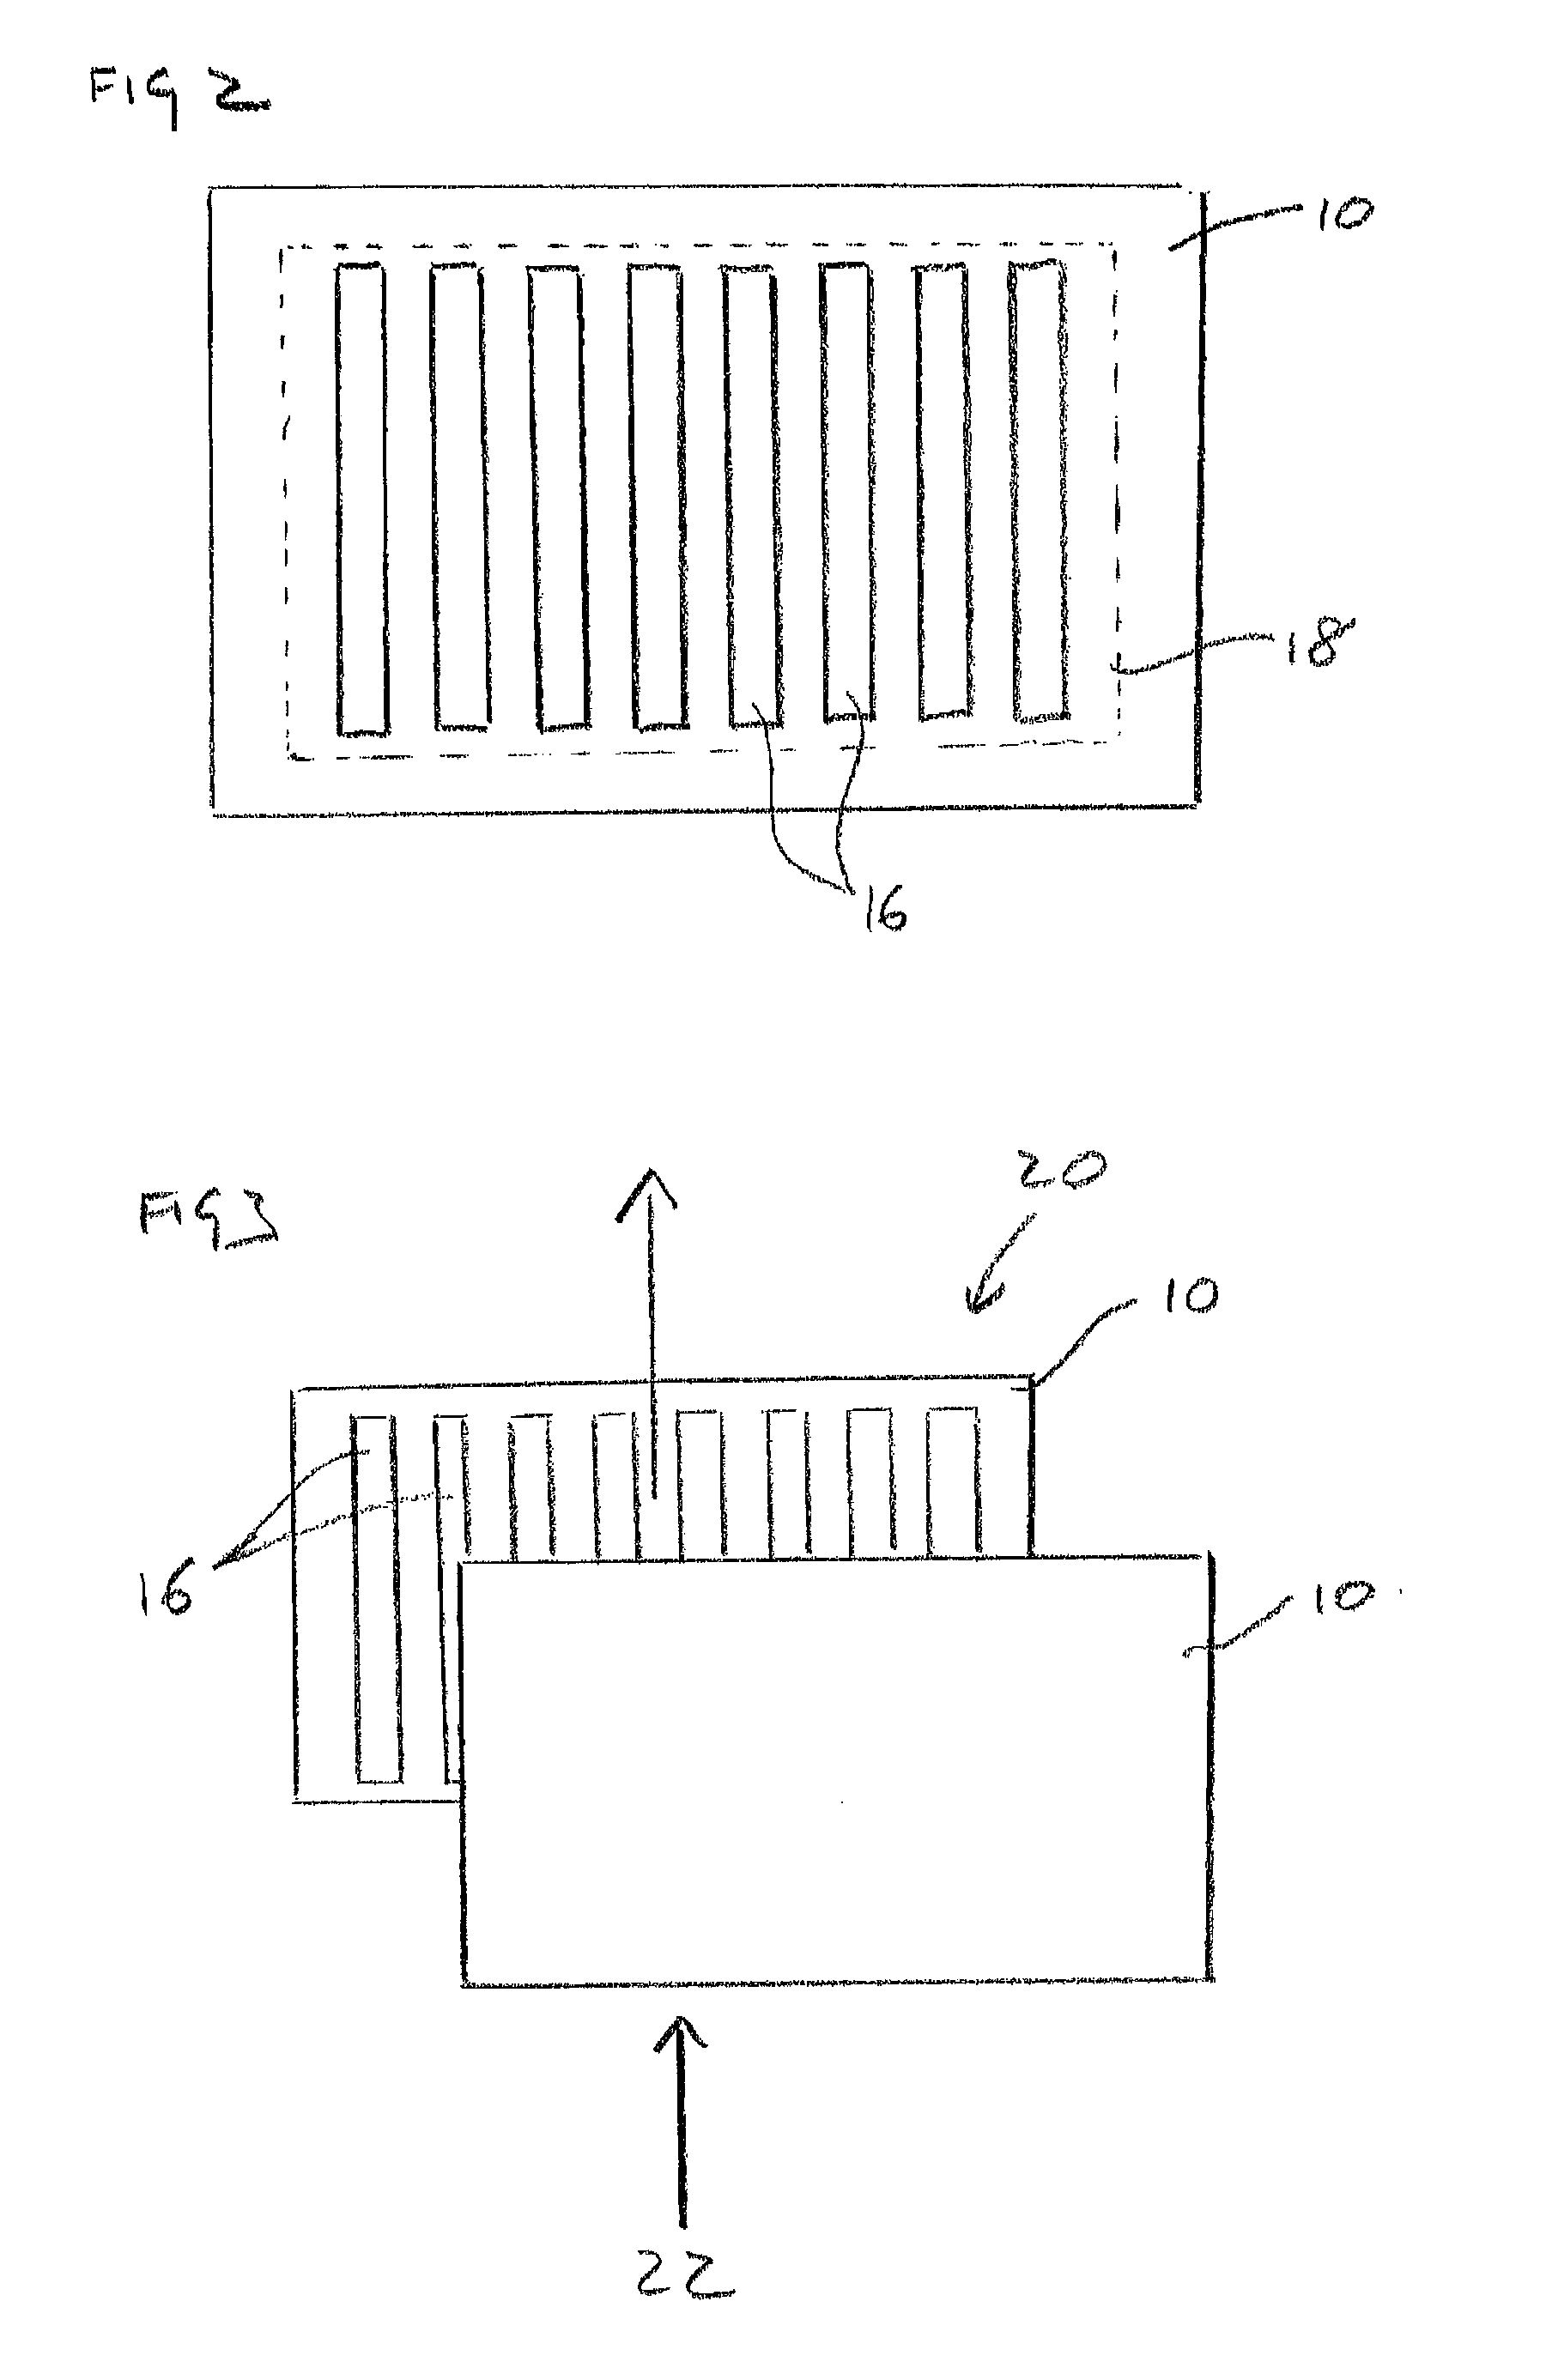 Diamond electrodes for electrochemical devices